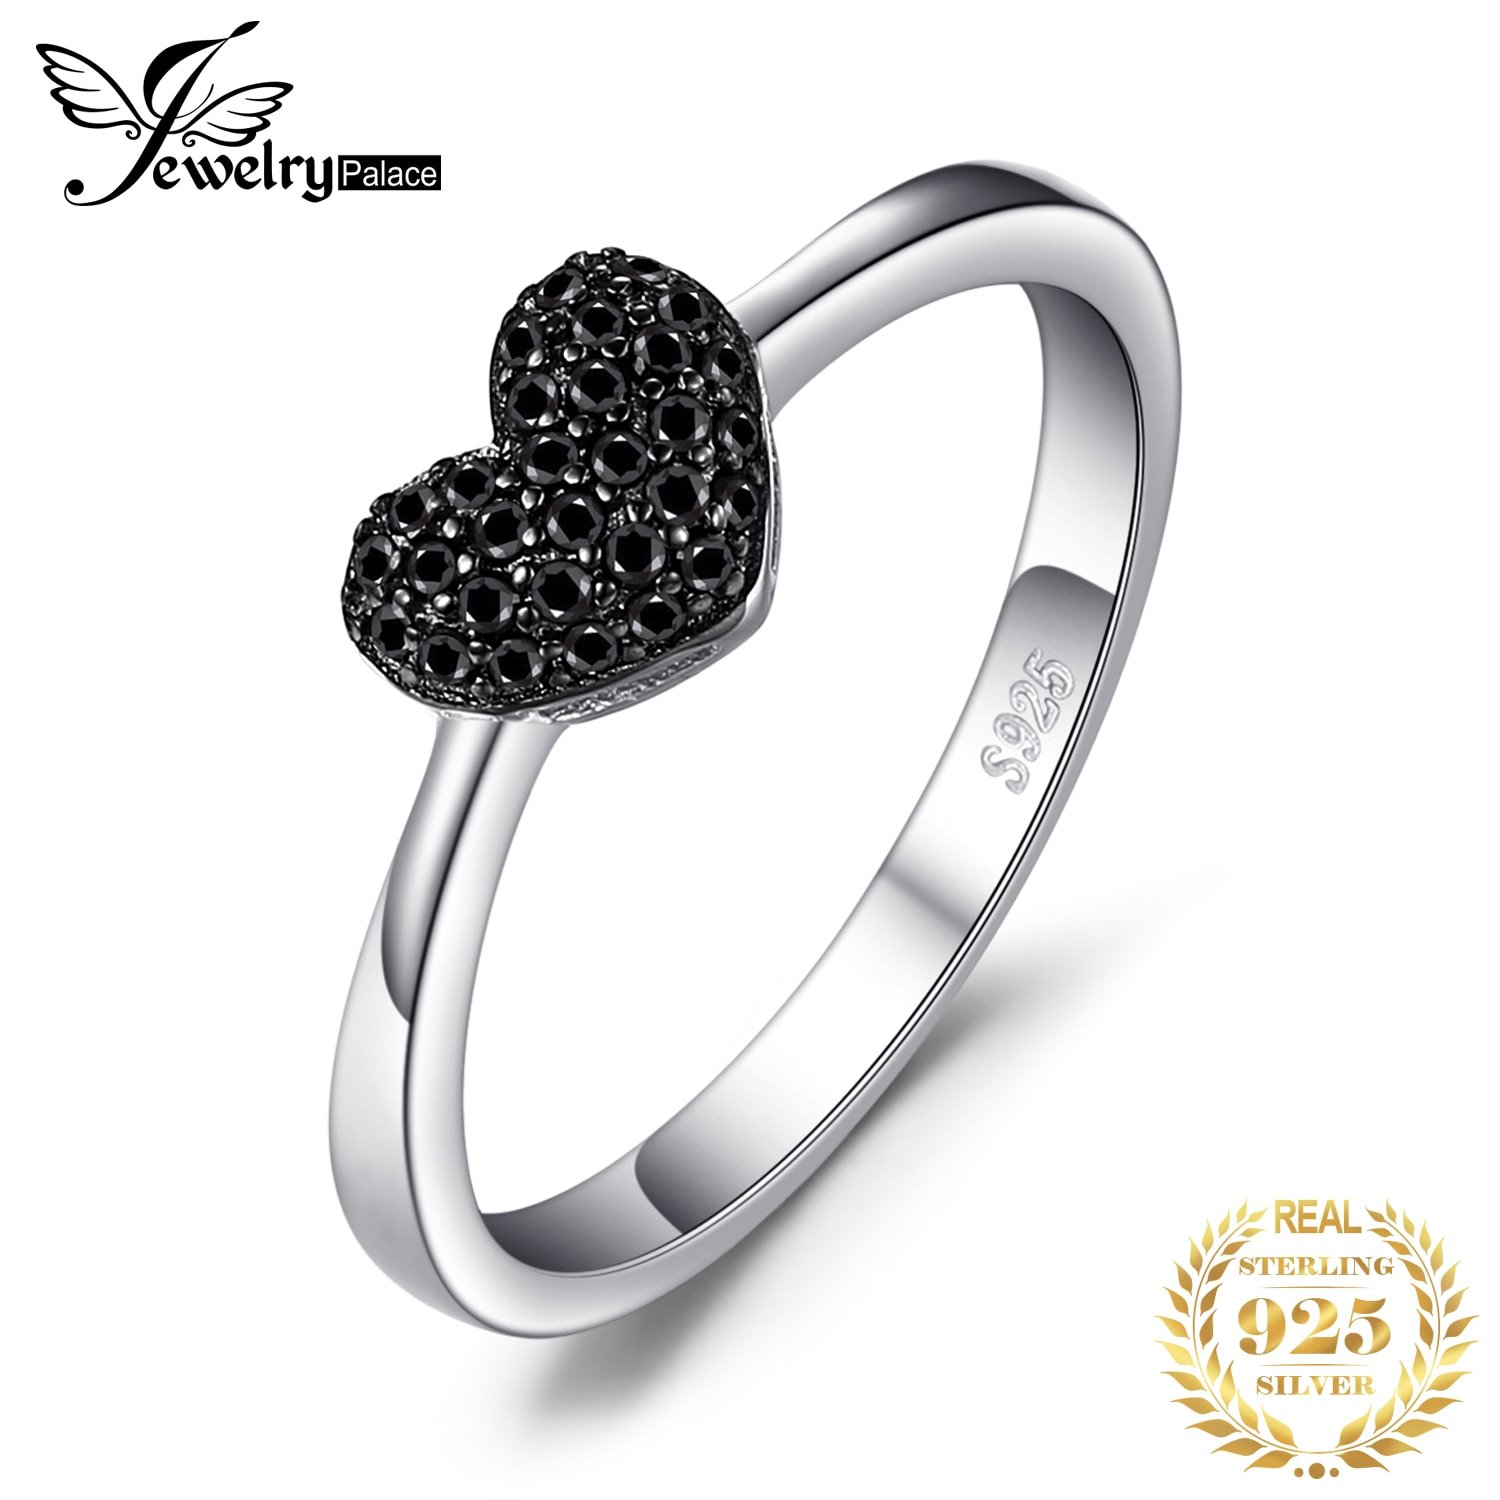 JPalace Heart Natural Black Spinel Ring 925 Sterling Silver